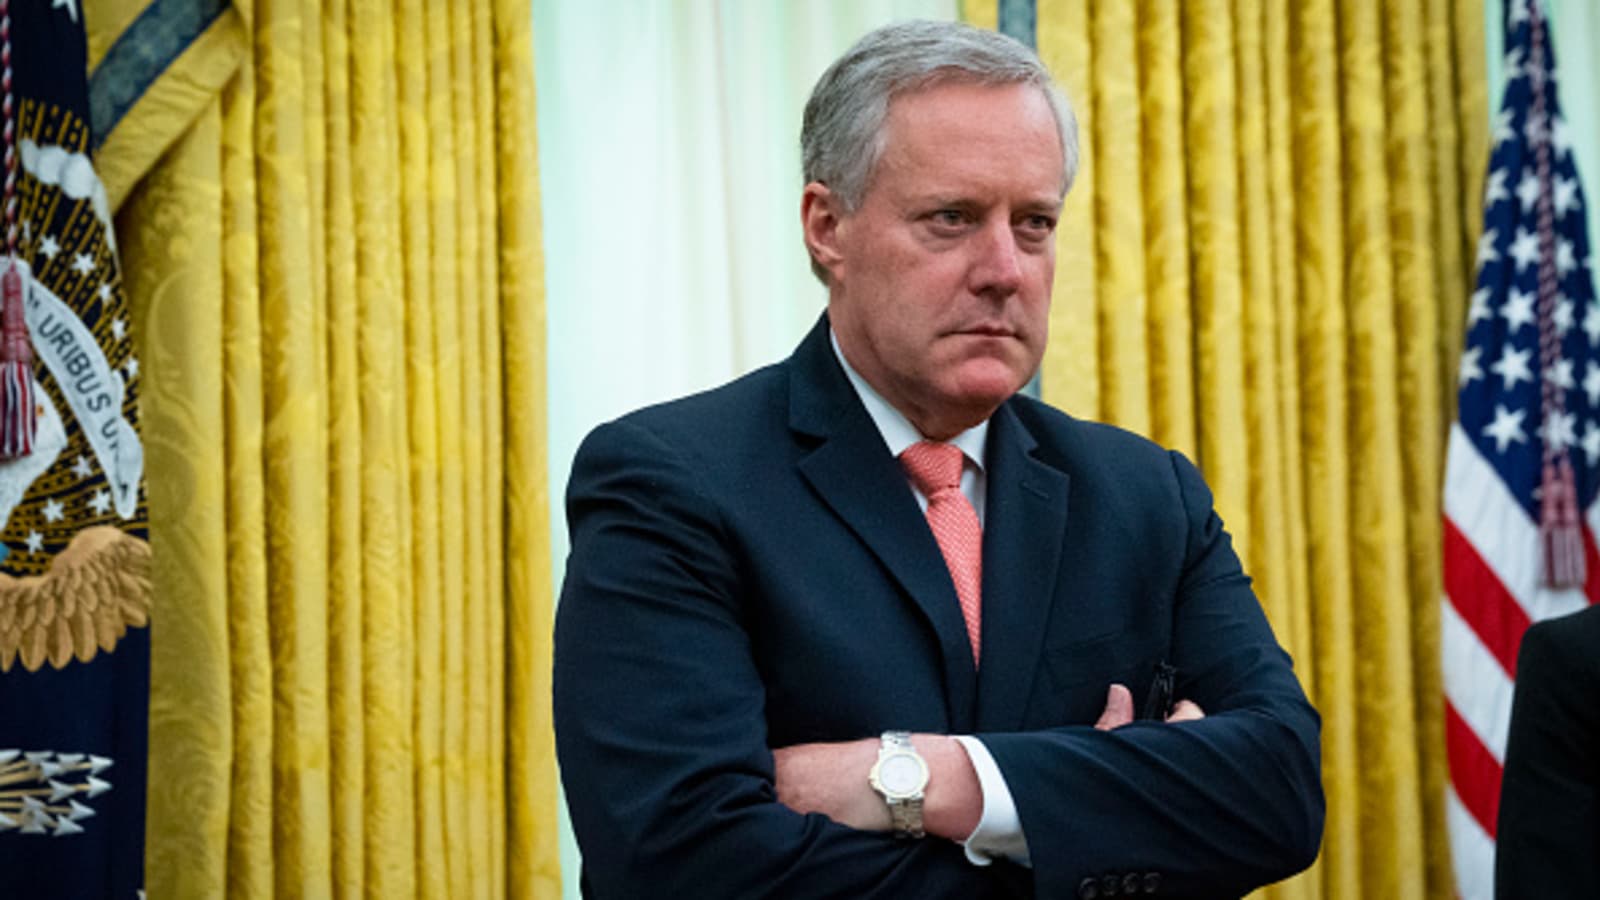 Jan. 6 panel votes for House to hold Trump aide Mark Meadows in contempt